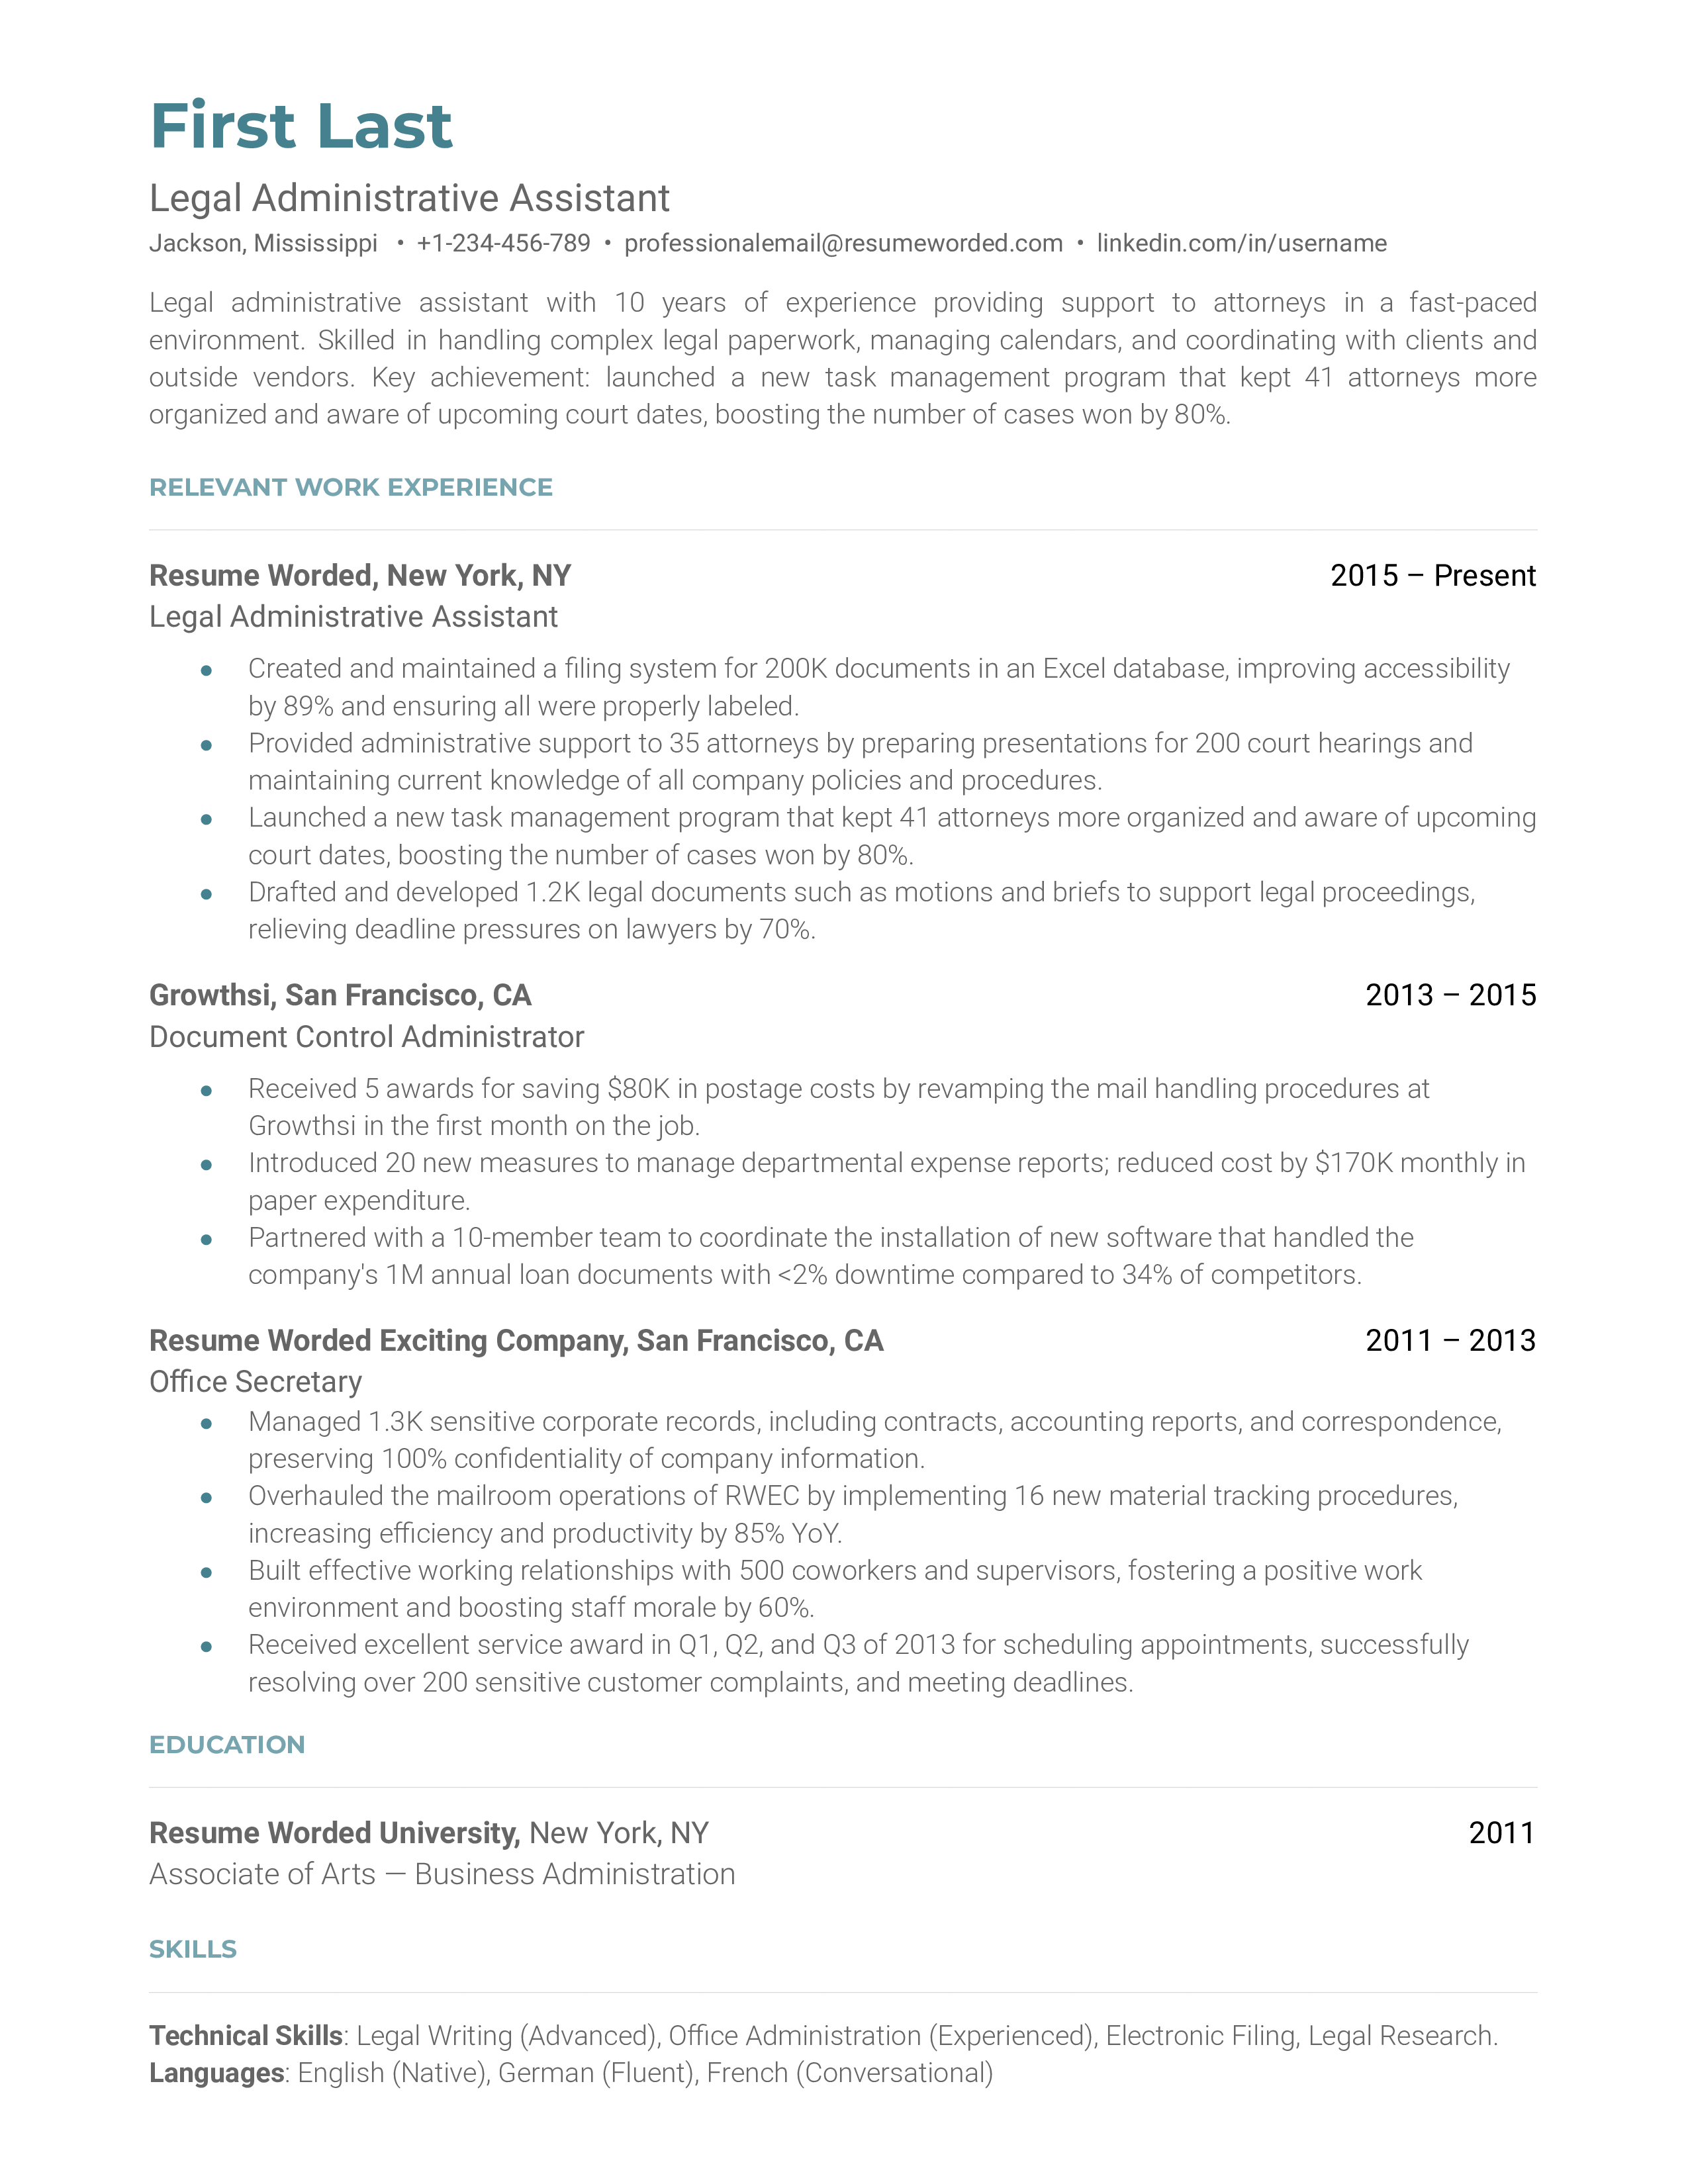 A legal administrative assistant resume sample that highlights the applicants administrative experience and transferable skills